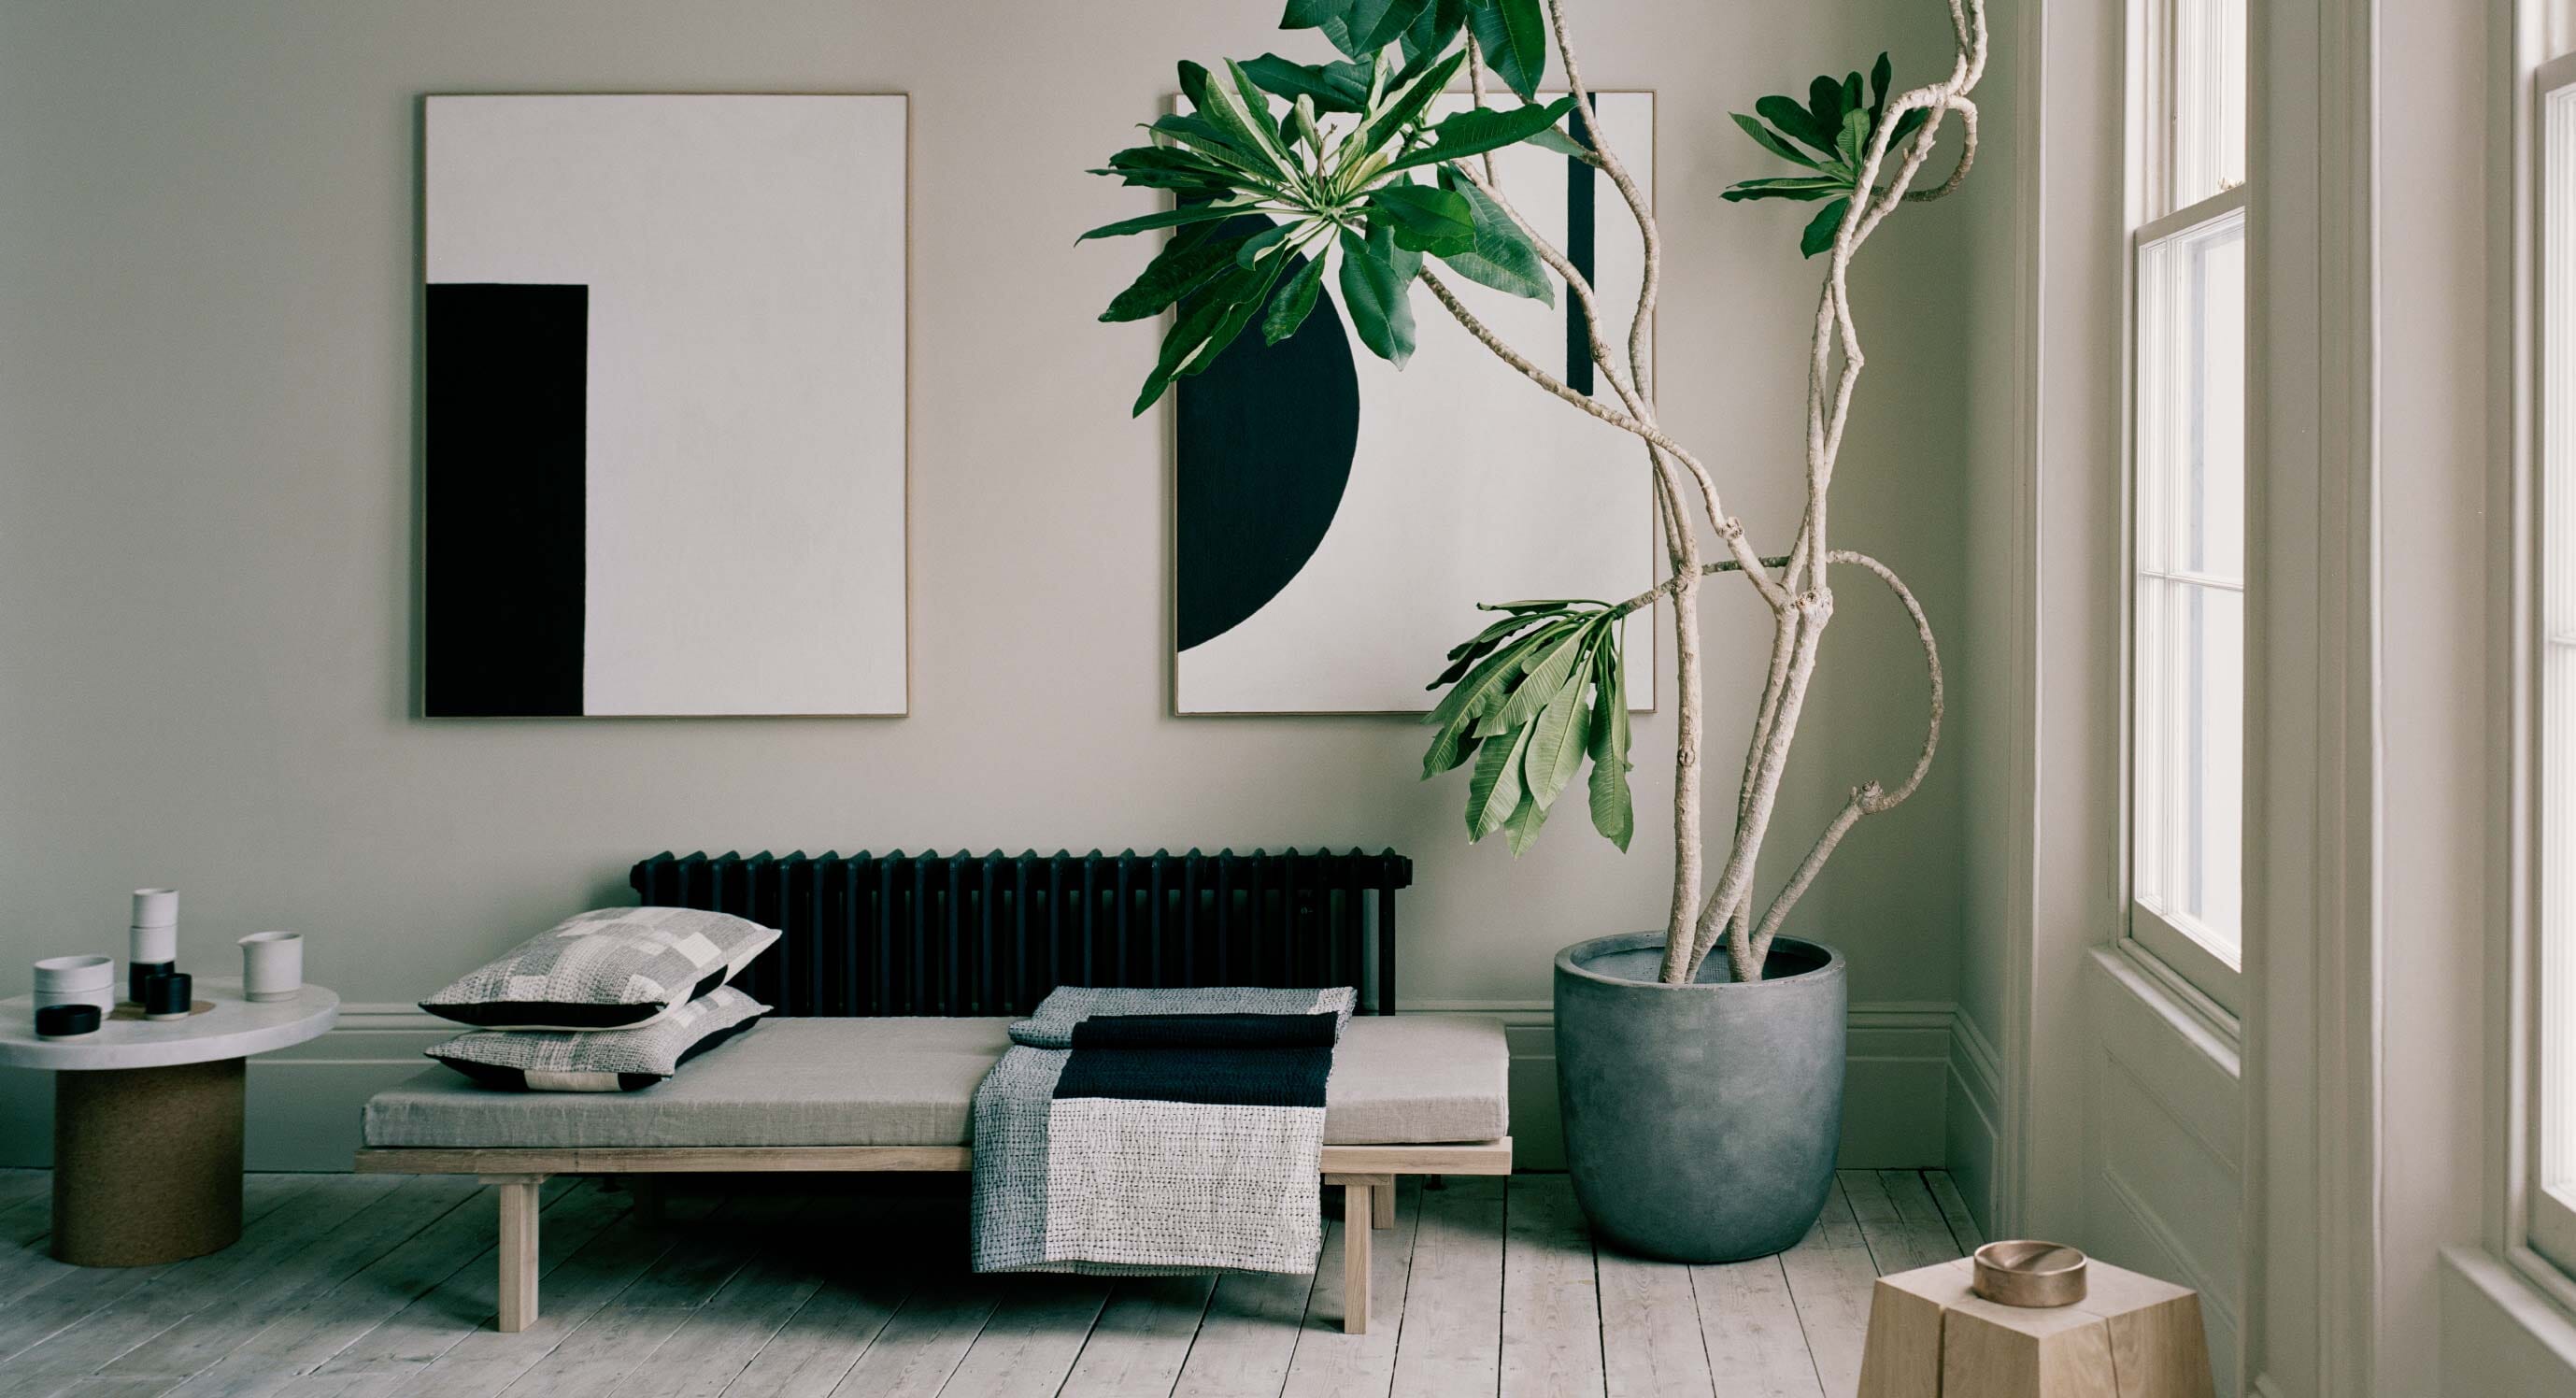 Interior Design Tricks To Borrow From The House of Grey